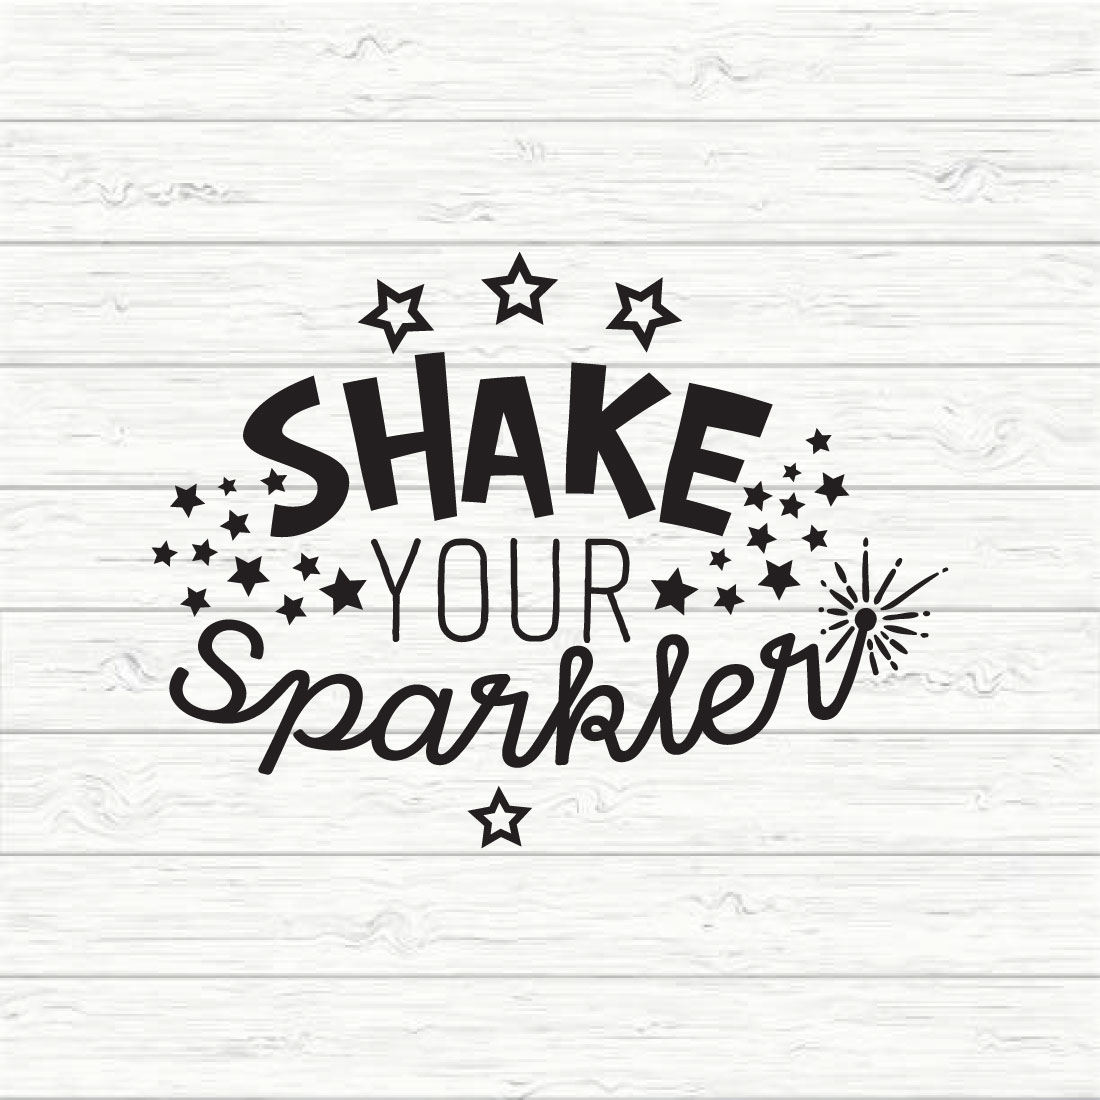 Shake your Sparkler preview image.